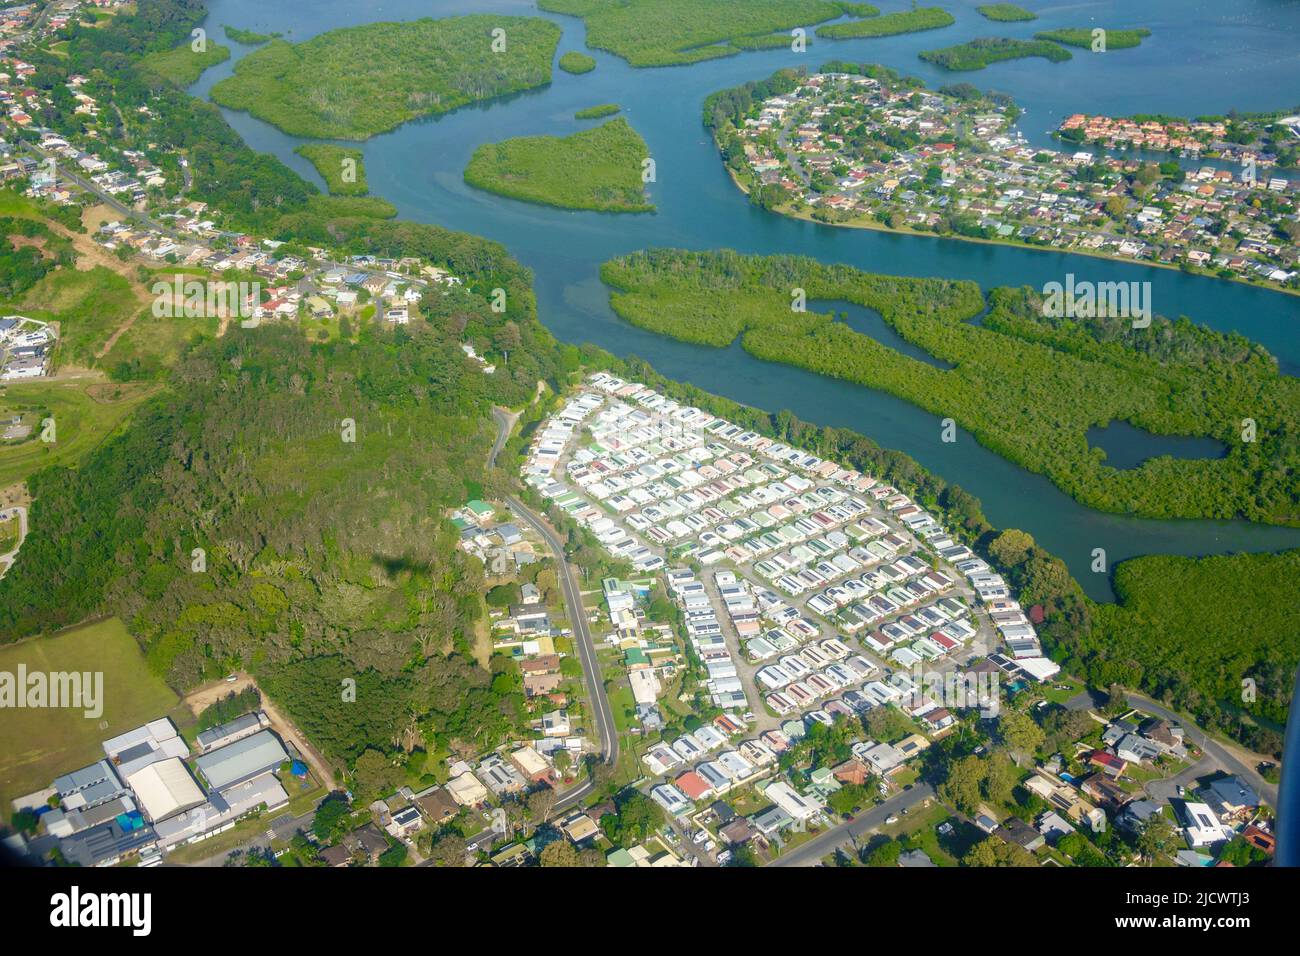 Roof tops and surrounding green space and canals of Coolangatta on Gold Coast Queensland Australia. Stock Photo